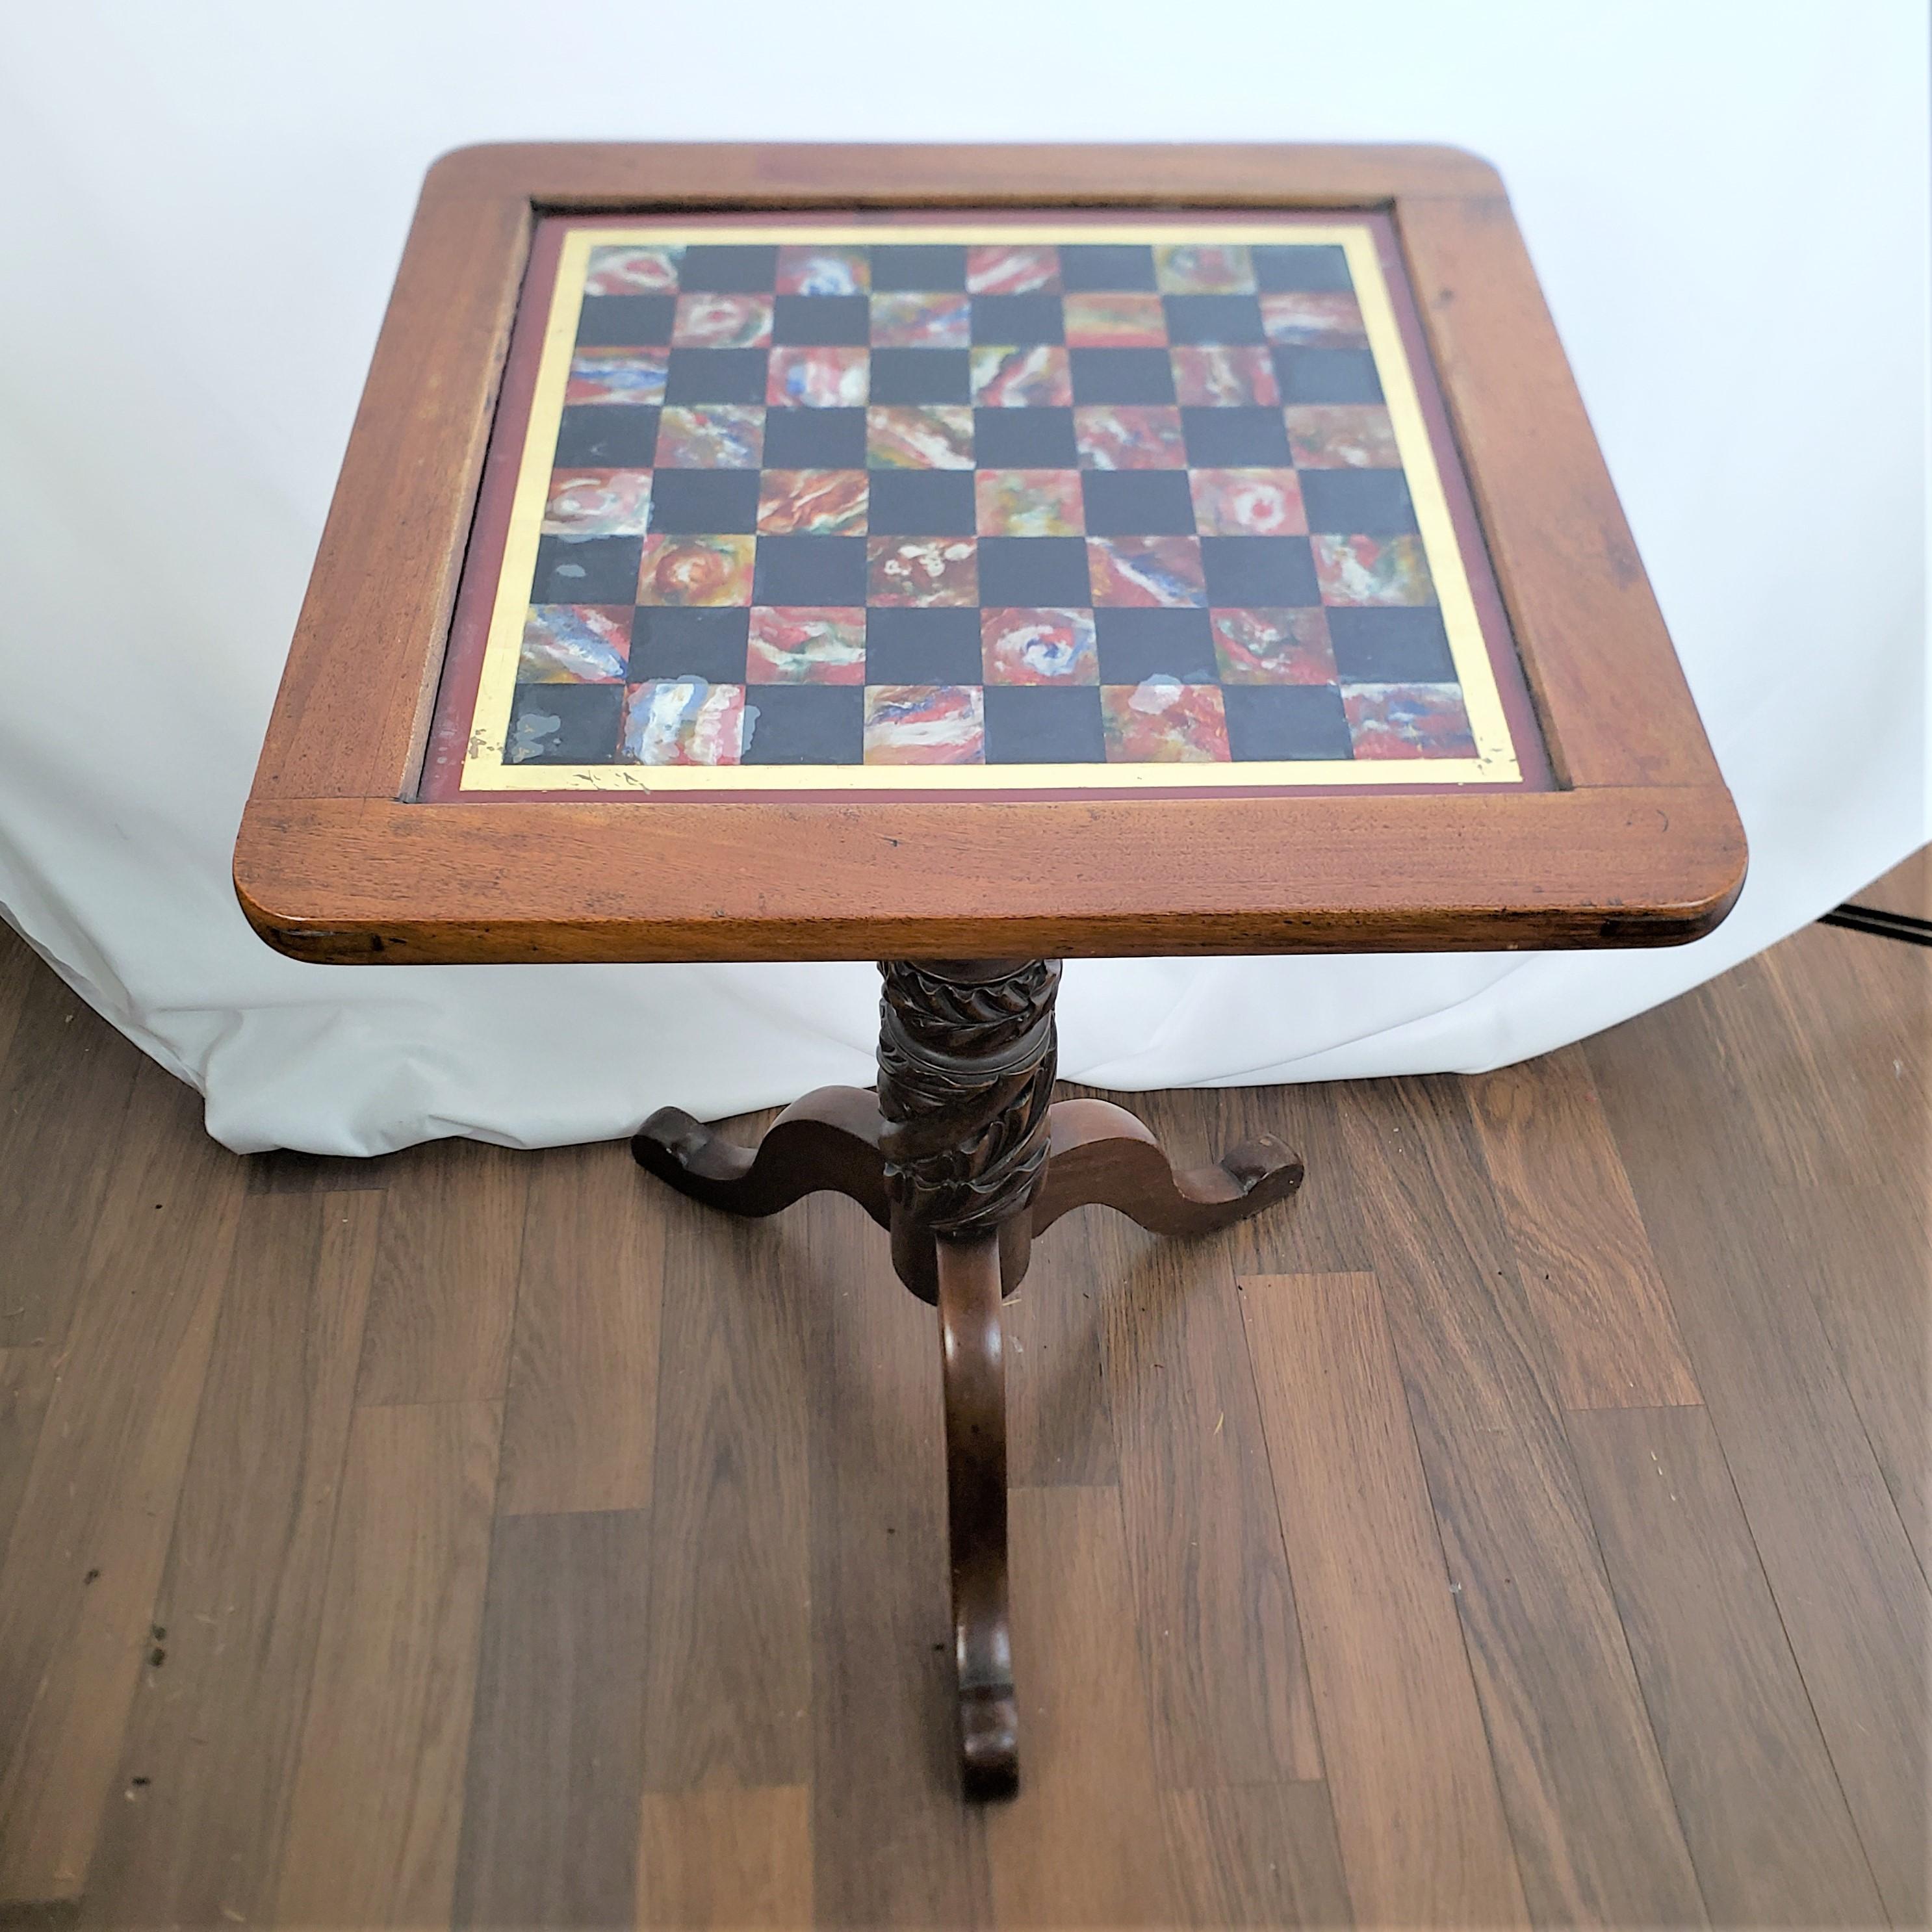 This antique games table is unsigned, but presumed to have originated from the United States and date to approximately 1880 and done in the period Victorian style. The top of the table is made with a walnut surround with an inset reverse painted